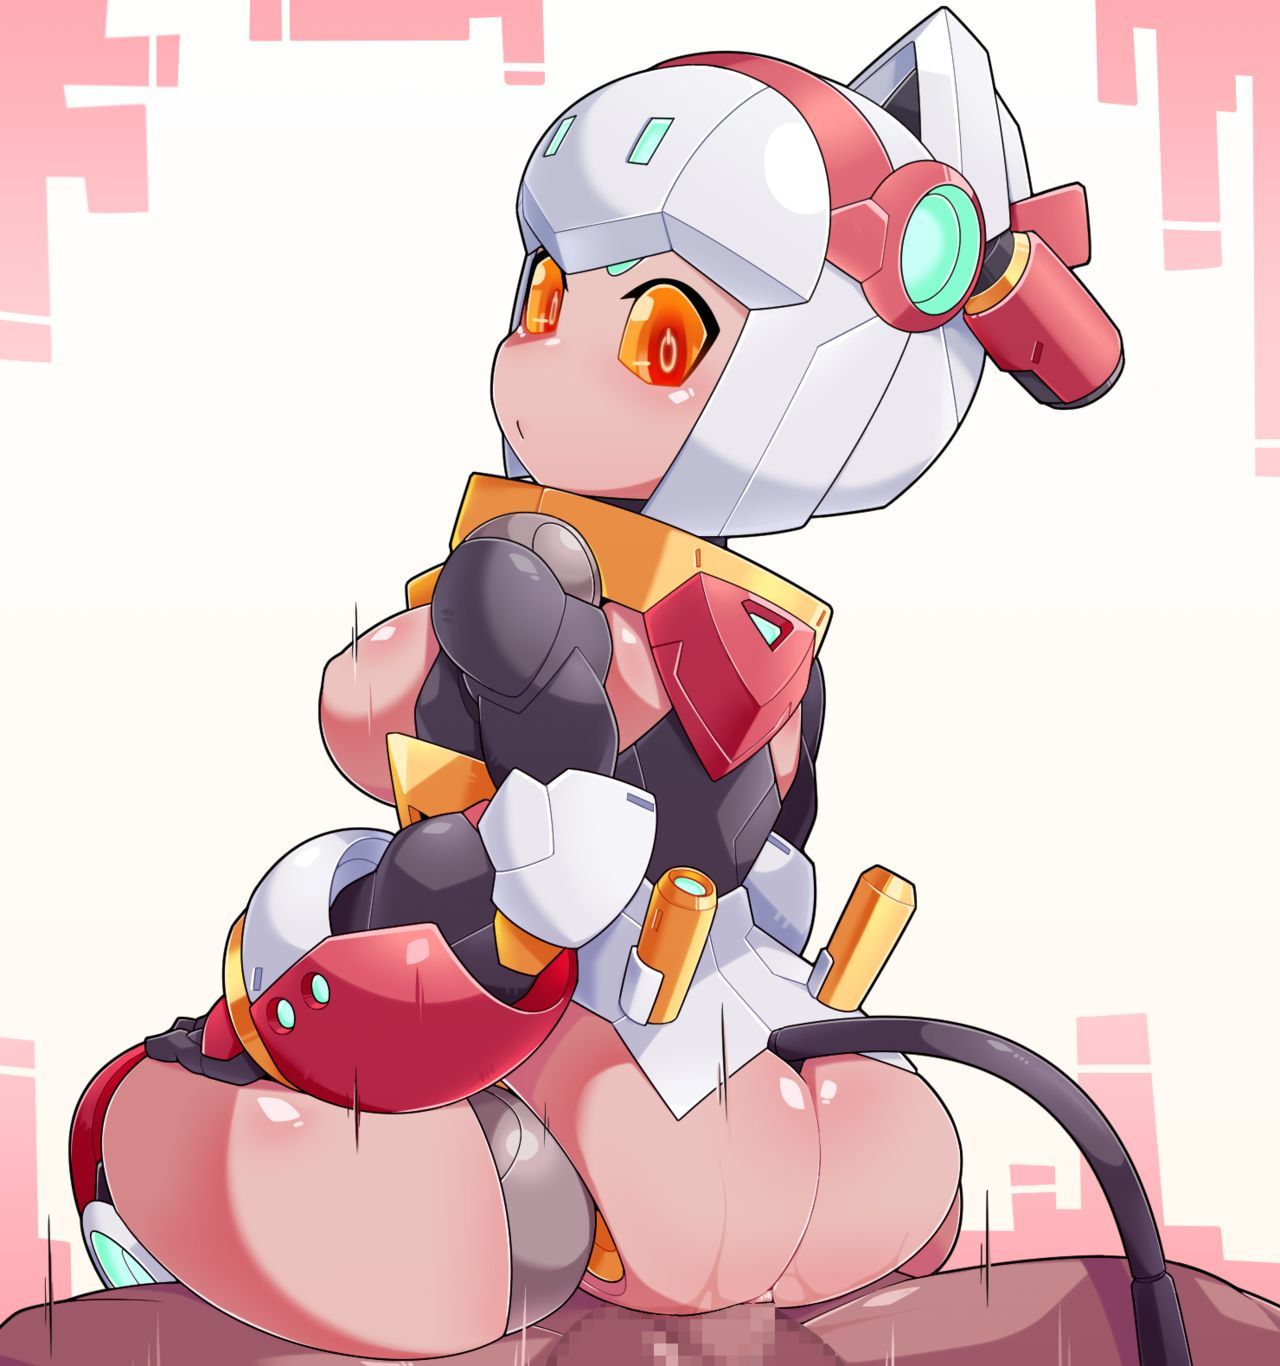 [Pixiv] kni-droid (Kにぃー, weis2626) (Pixiv ID: 1937581) 6